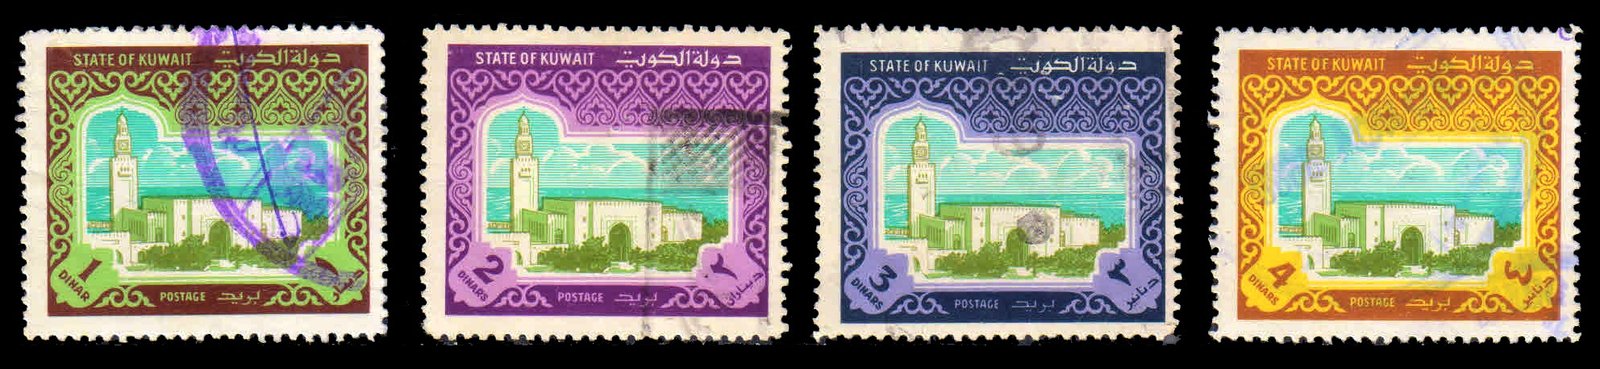 KUWAIT 1981 - Sief Palace, Set of 4 Stamps, Used, S.G. 911-914, Cat £ 63